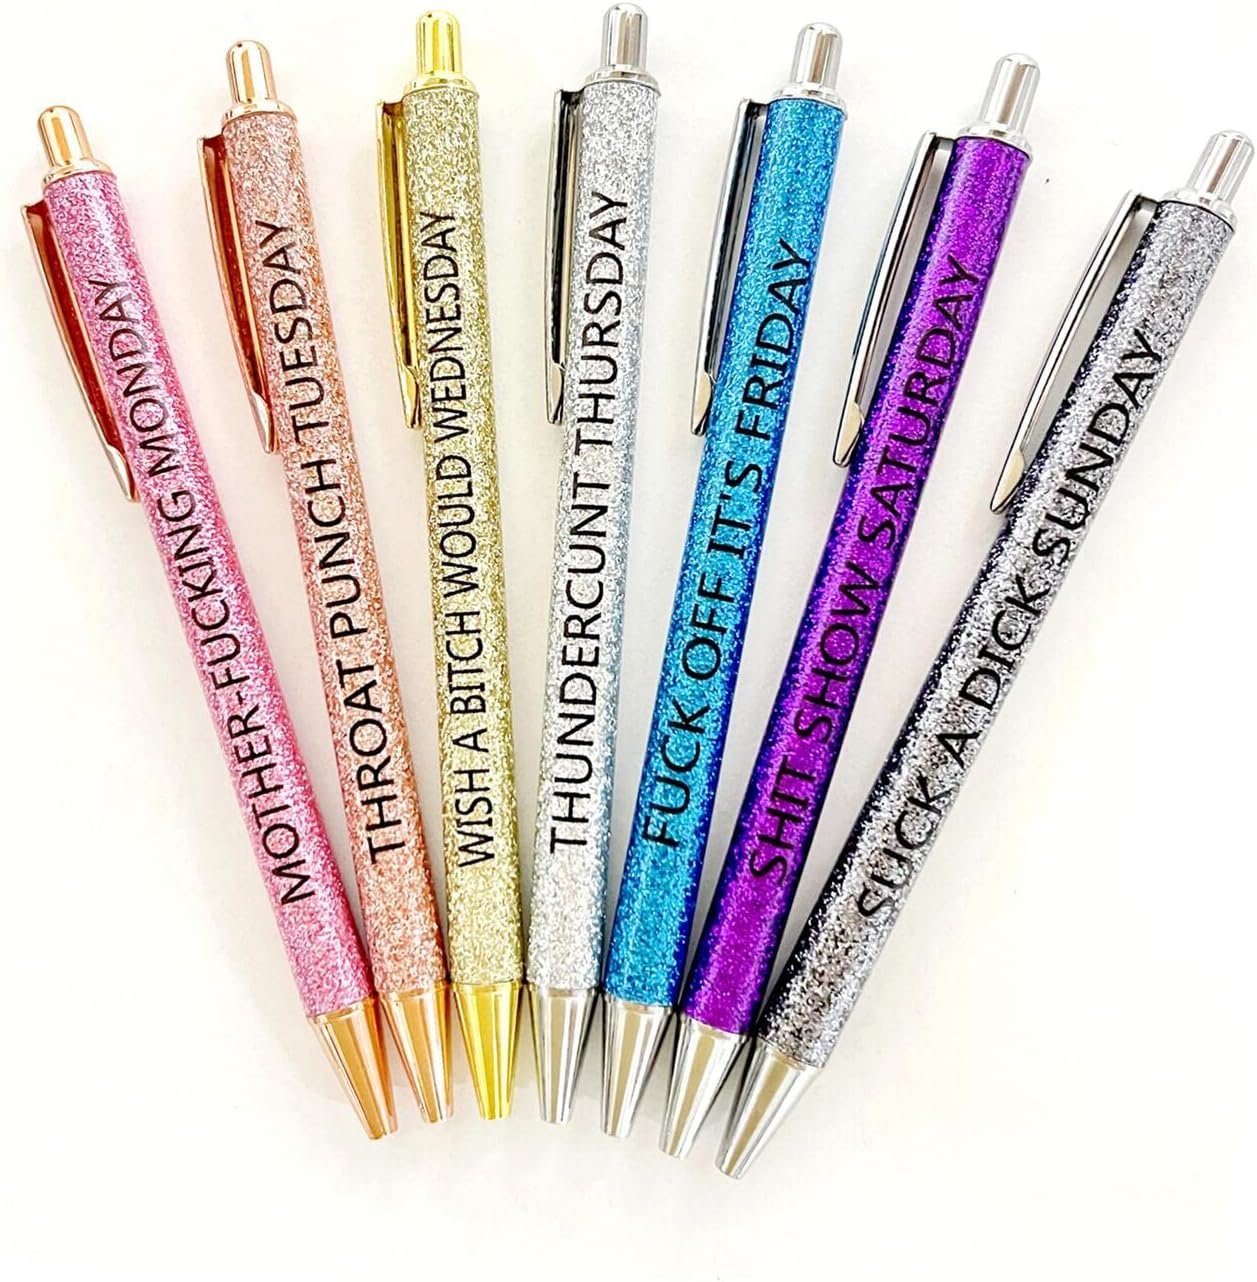 7pcs Funny Ballpoint Pens Daily Different Swear Word Weekend Set, Comfortable Writing Black Ink